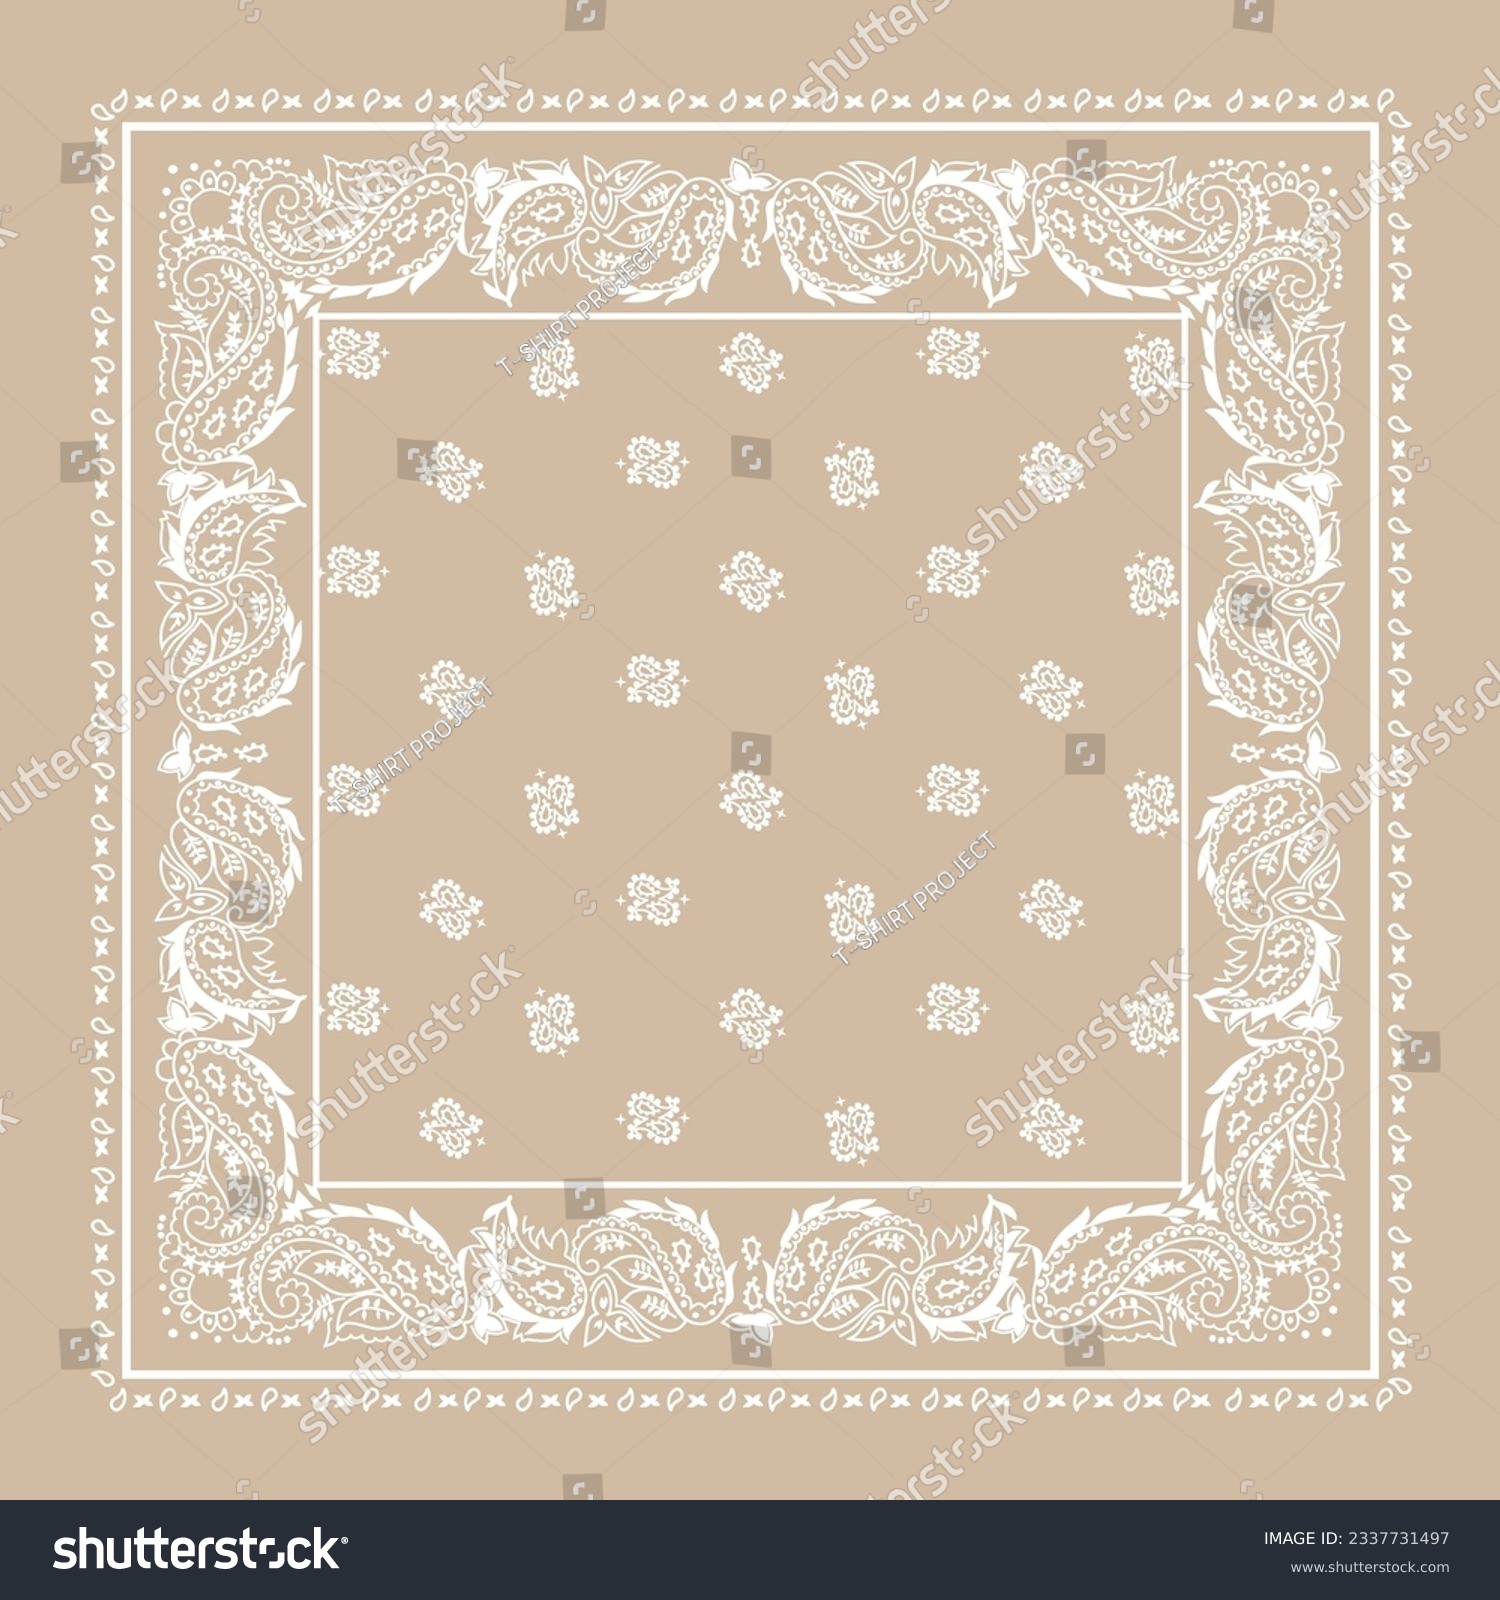 SVG of Ornamental paisley graphic for bandana or any design svg